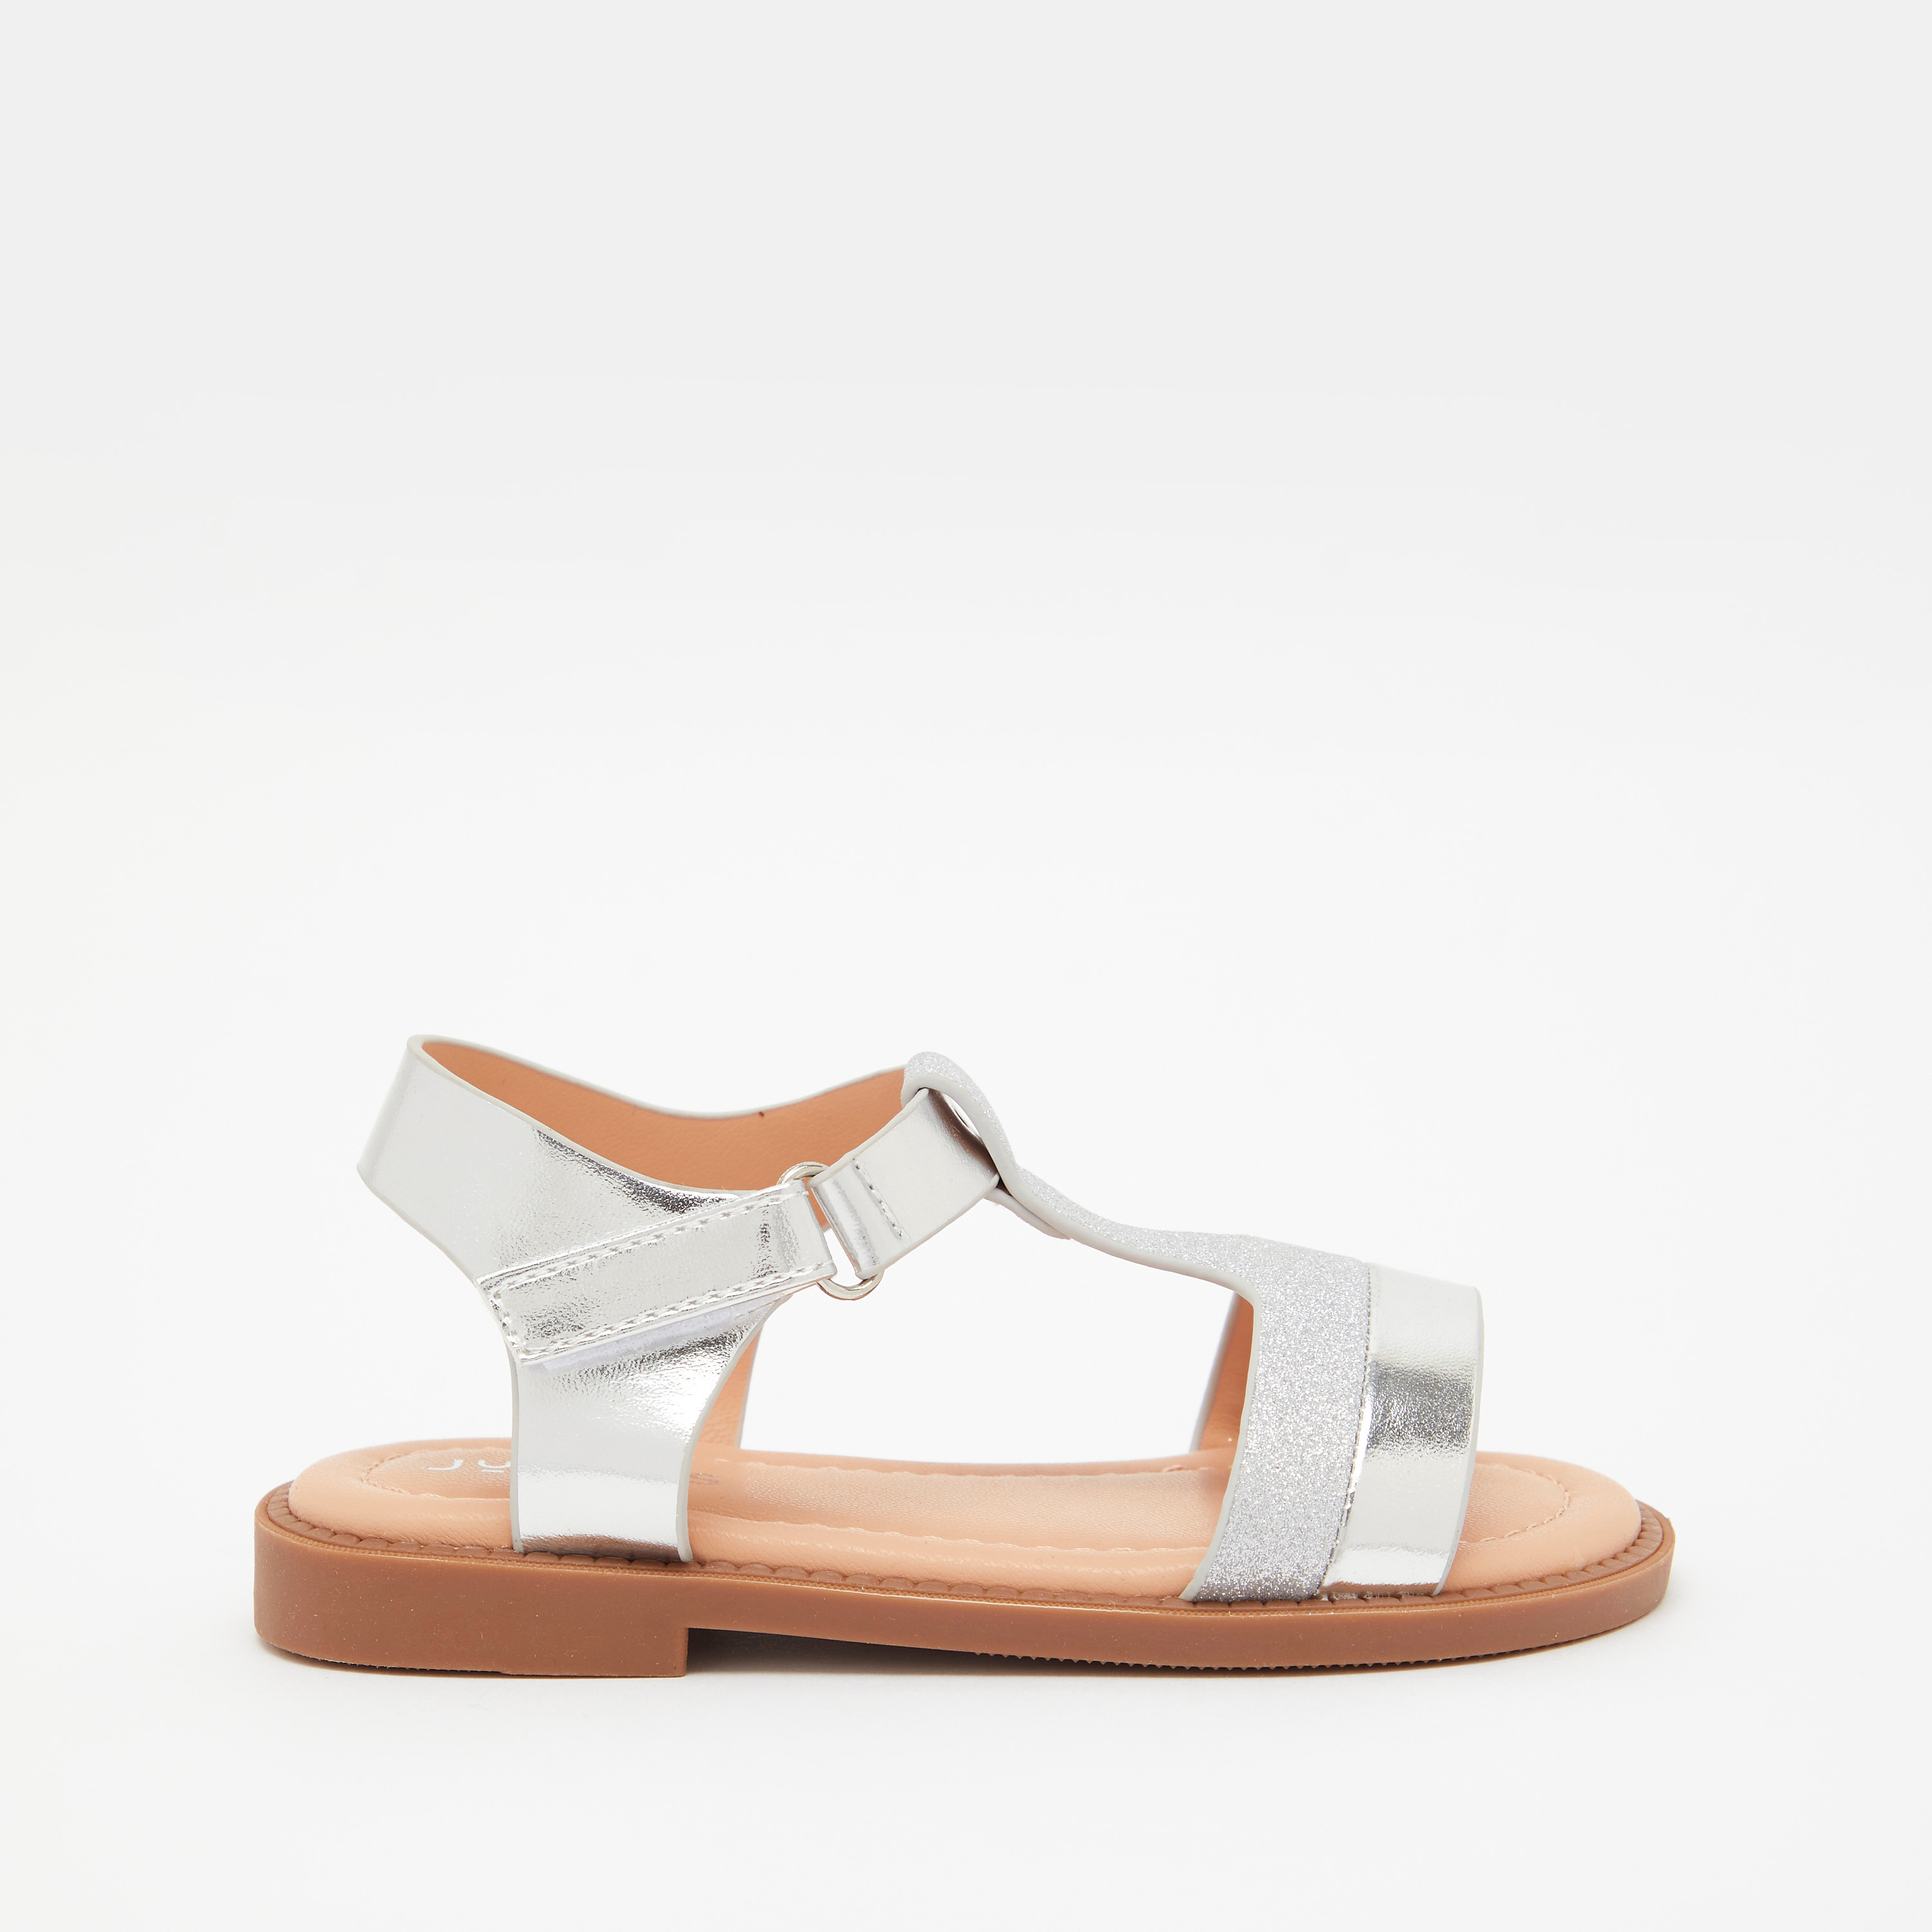 Buy Sling Sandals Online in UAE from Matalan